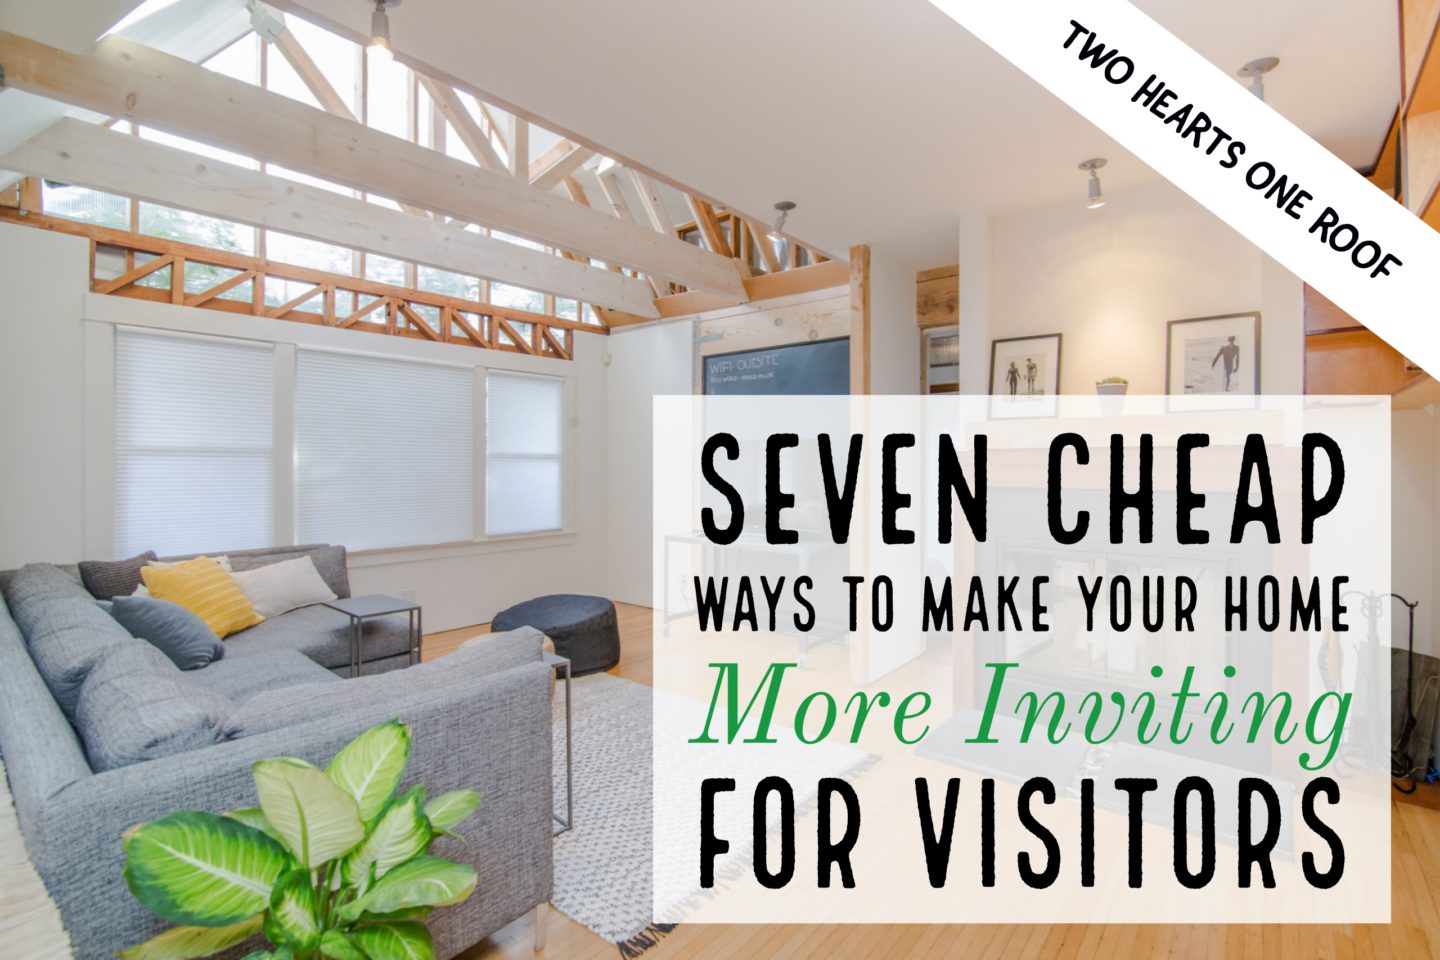 Interiors // Seven Cheap Ways to Make Your Home More Inviting for Visitors